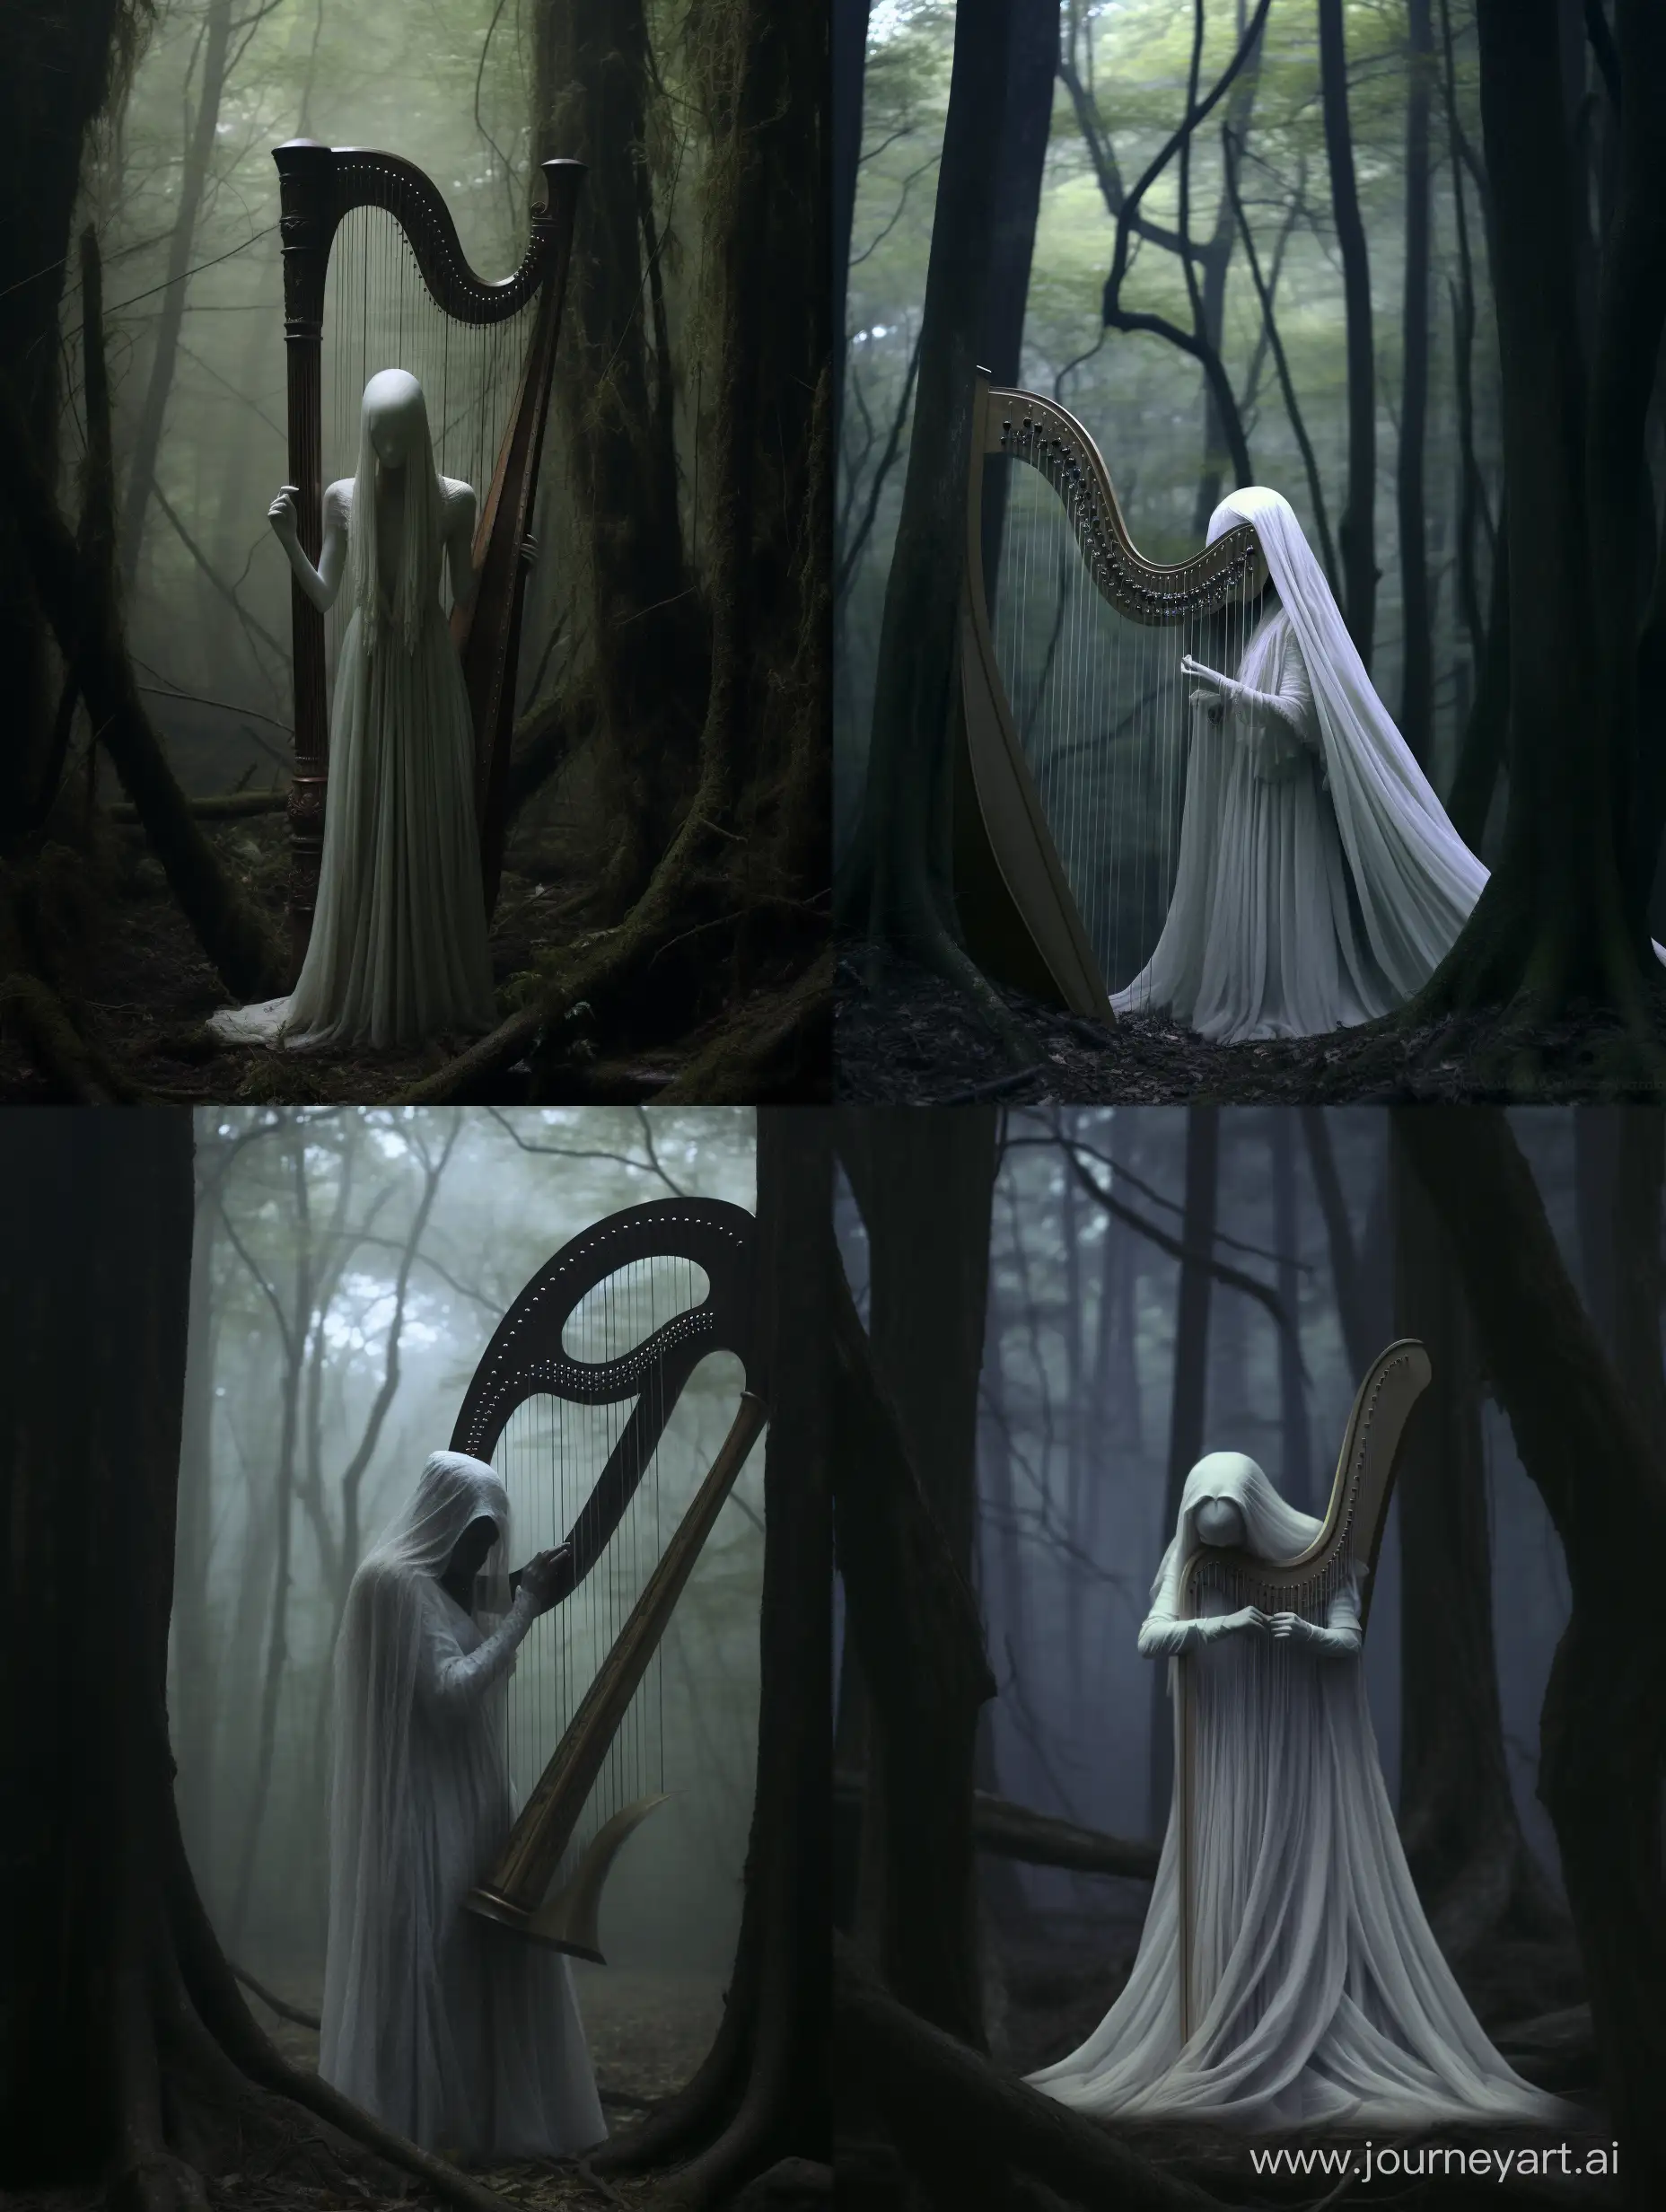 An ethereal figure playing a large harp in a creepy minimalistic forest. She possess a skull-like visage, adding an eerie and macabre atmosphere to the scene. The hair flows around the bony structures, lending an ethereal quality to her presence. Hyper real, hassleblad